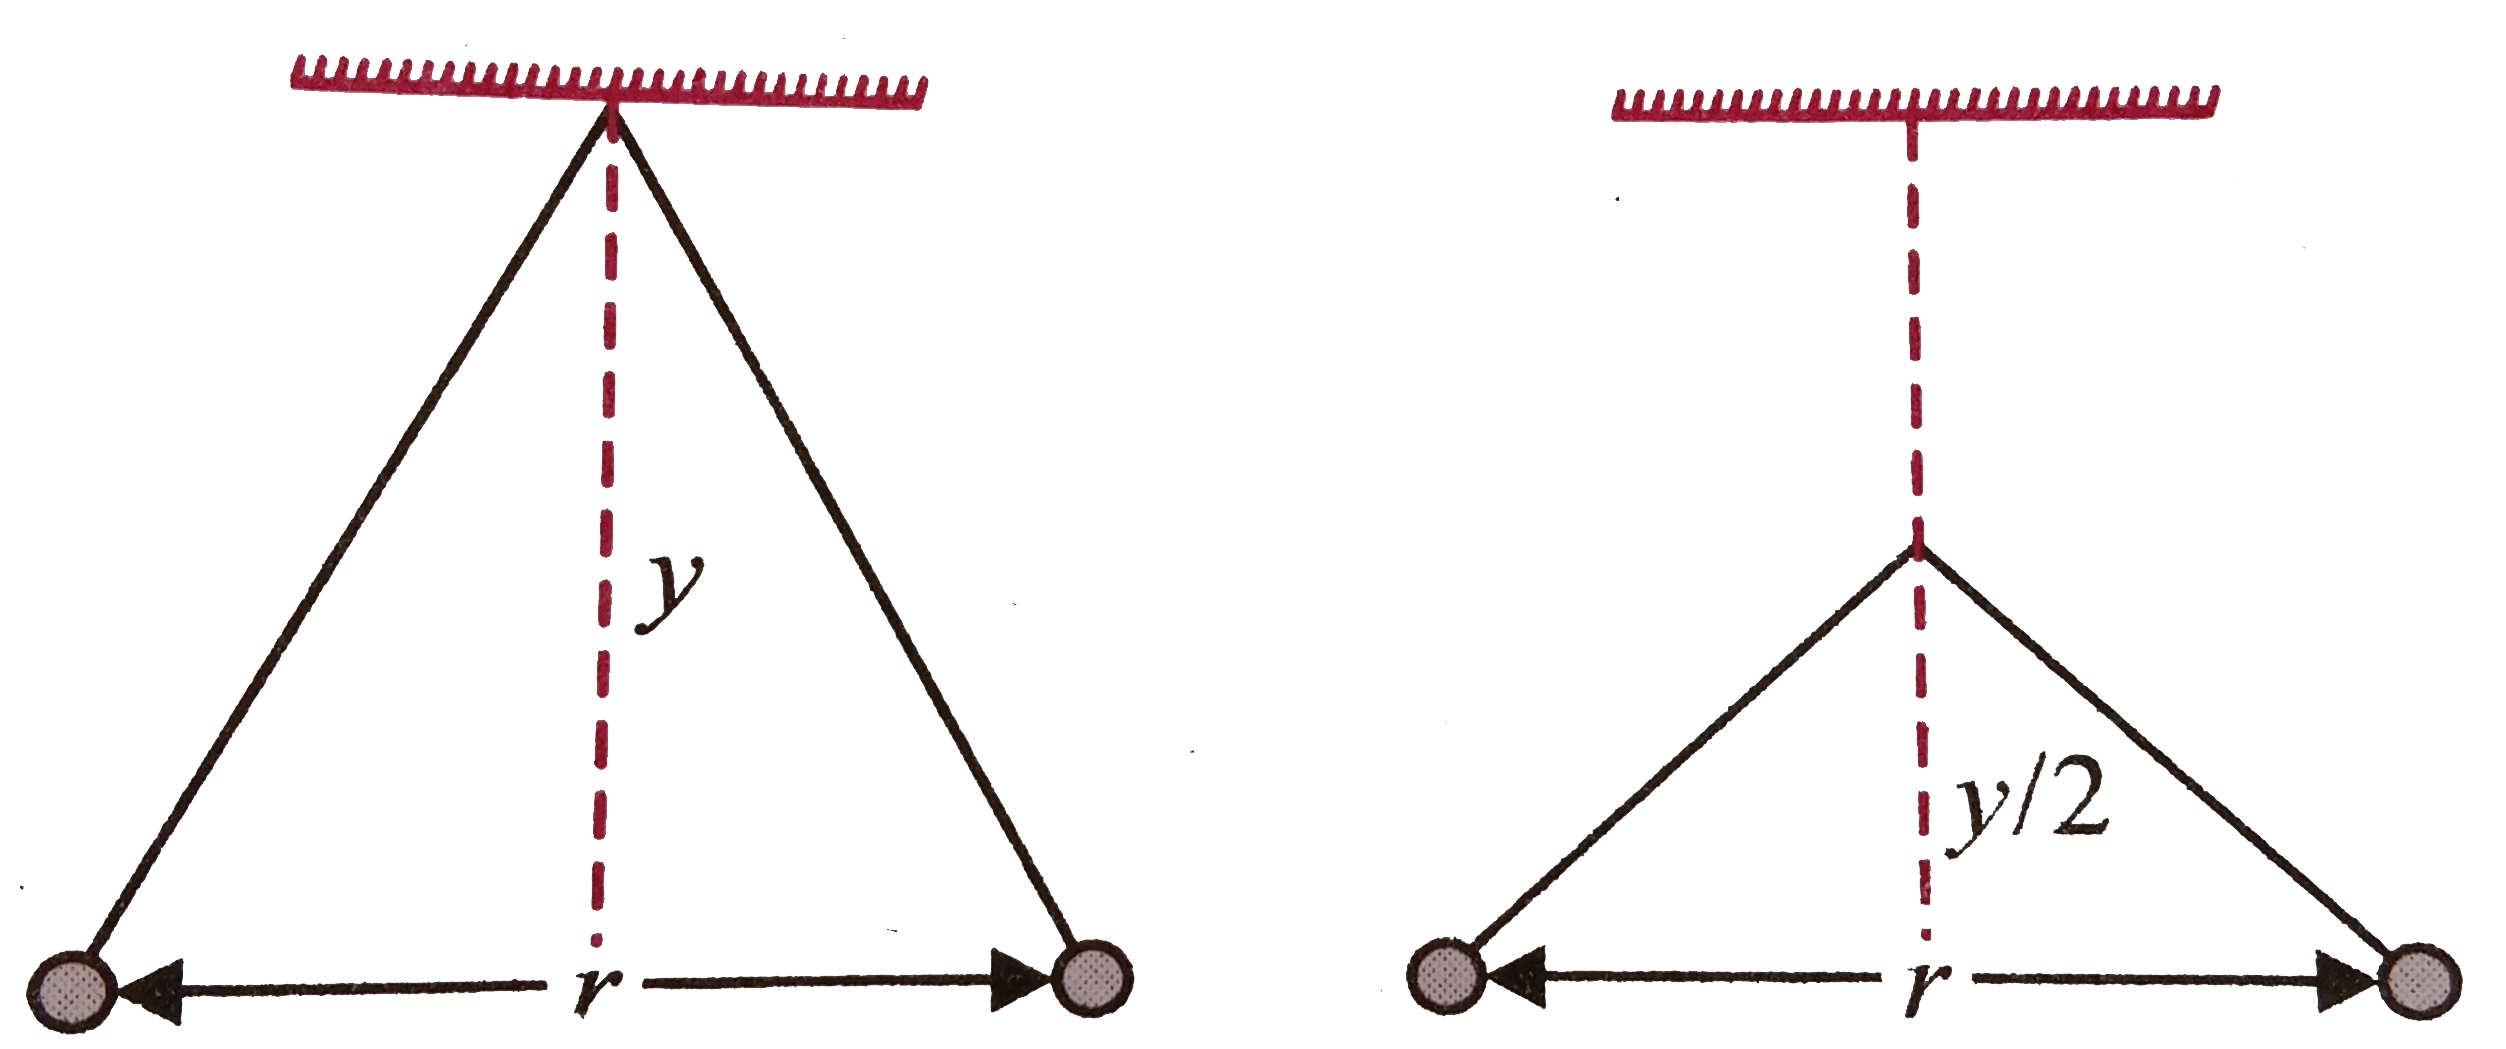 Two path  balls carrying eqaul chareges are suspended  froom a common point by strings  of equal  length, the strings  are rightly clamped  at half the height. The equilibrium separation between the balls, now becomes :